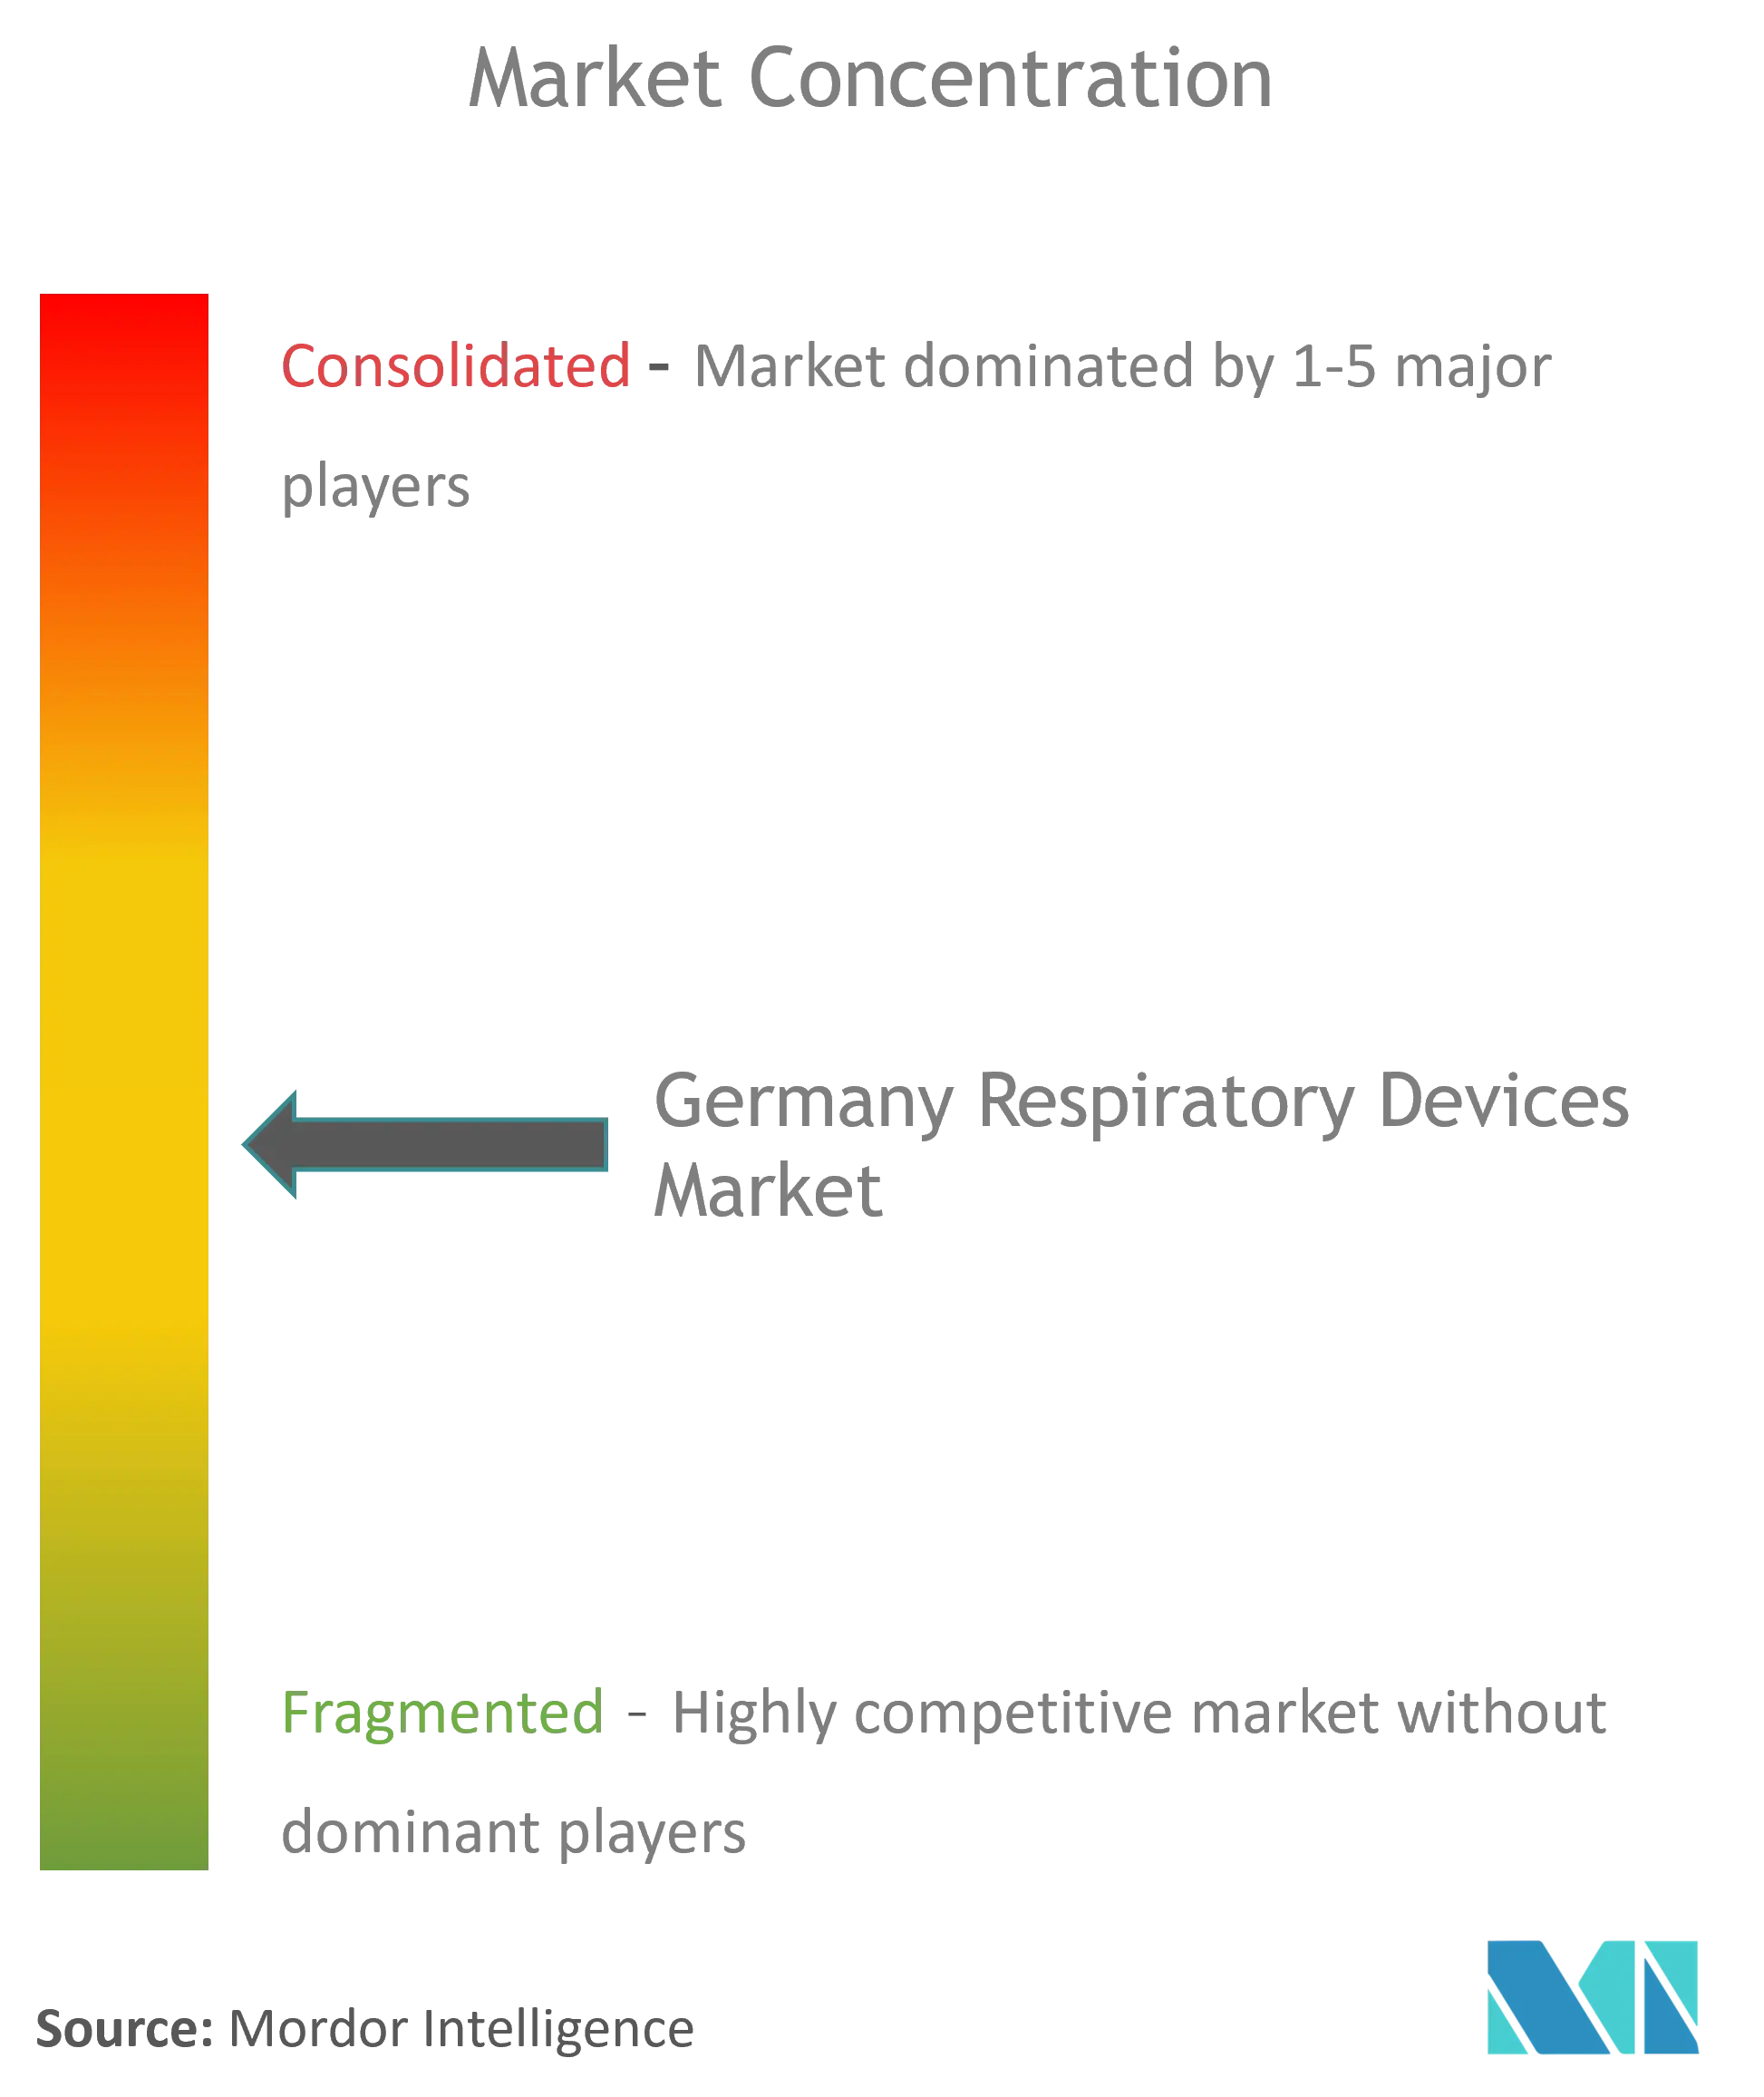 Germany Respiratory Devices Market Concentration